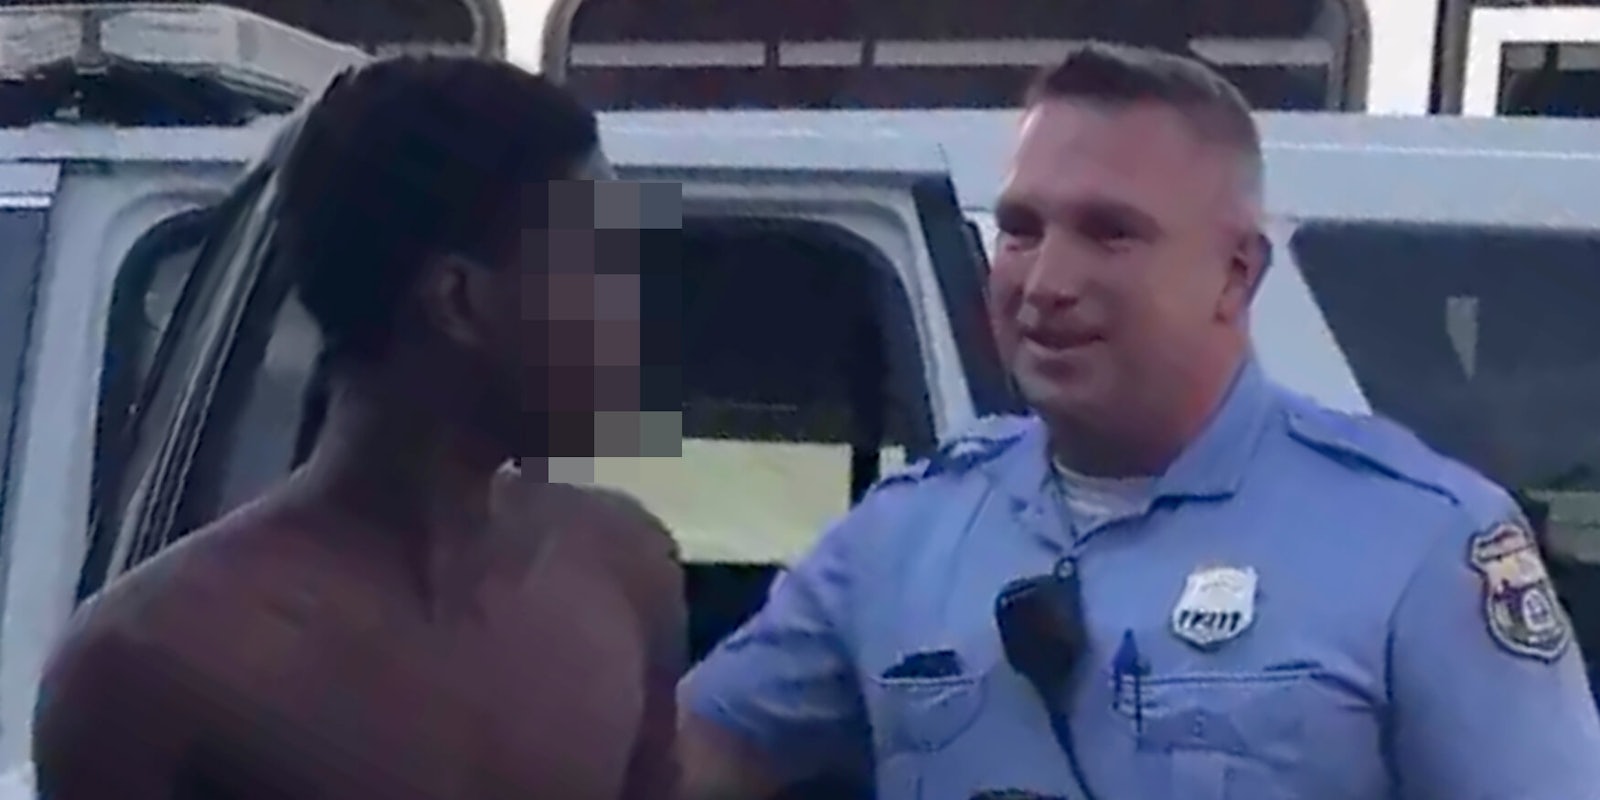 Philadelphia police officer laughs as he releases a minor after temporarily detaining him